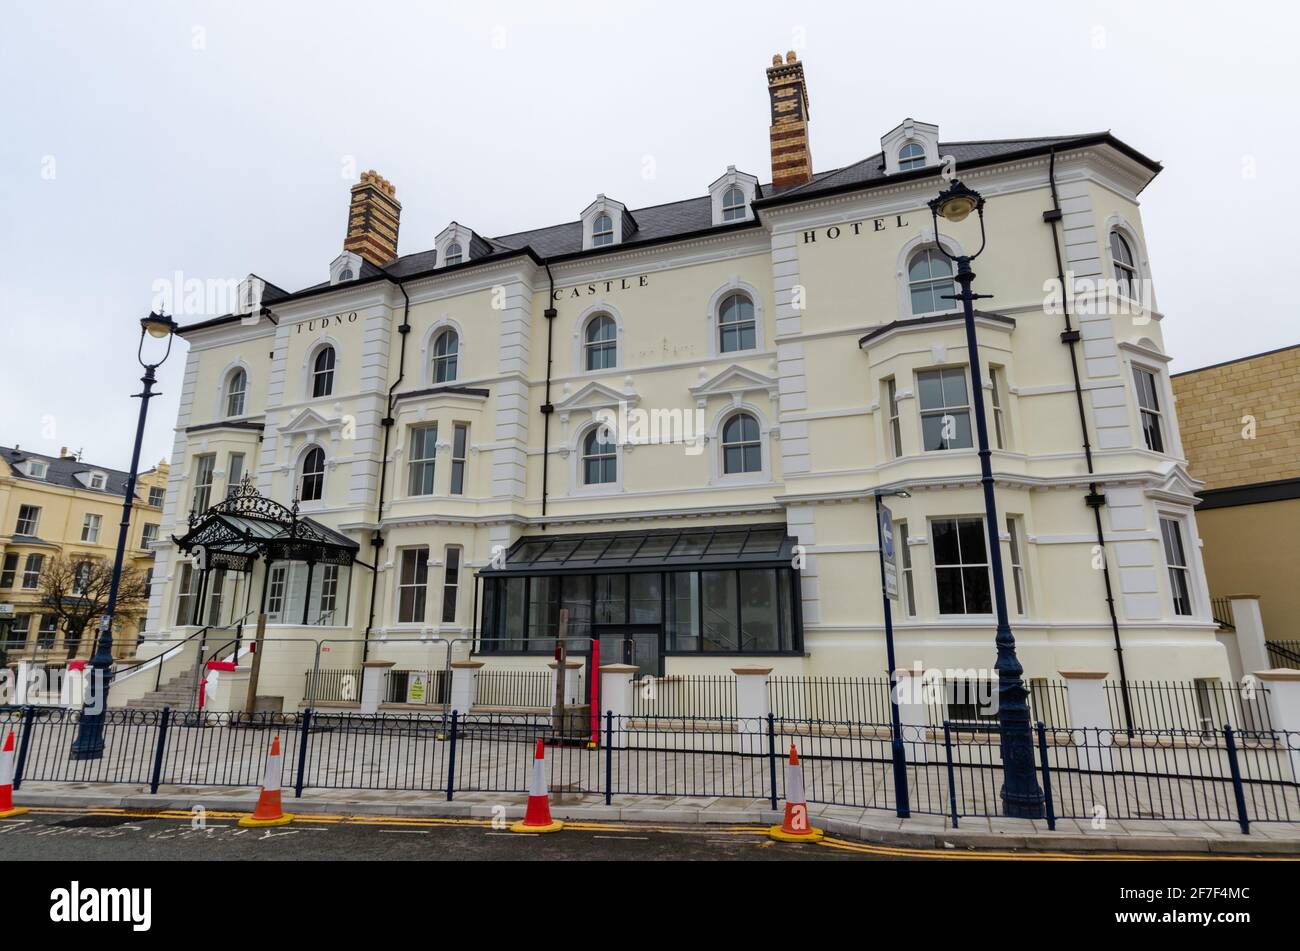 Llandudno, UK: Mar 18, 2021: Rebuilding work of the Tudno Castle Hotel is nearing completion. The redevelopment of the historic Victorian style proper Stock Photo